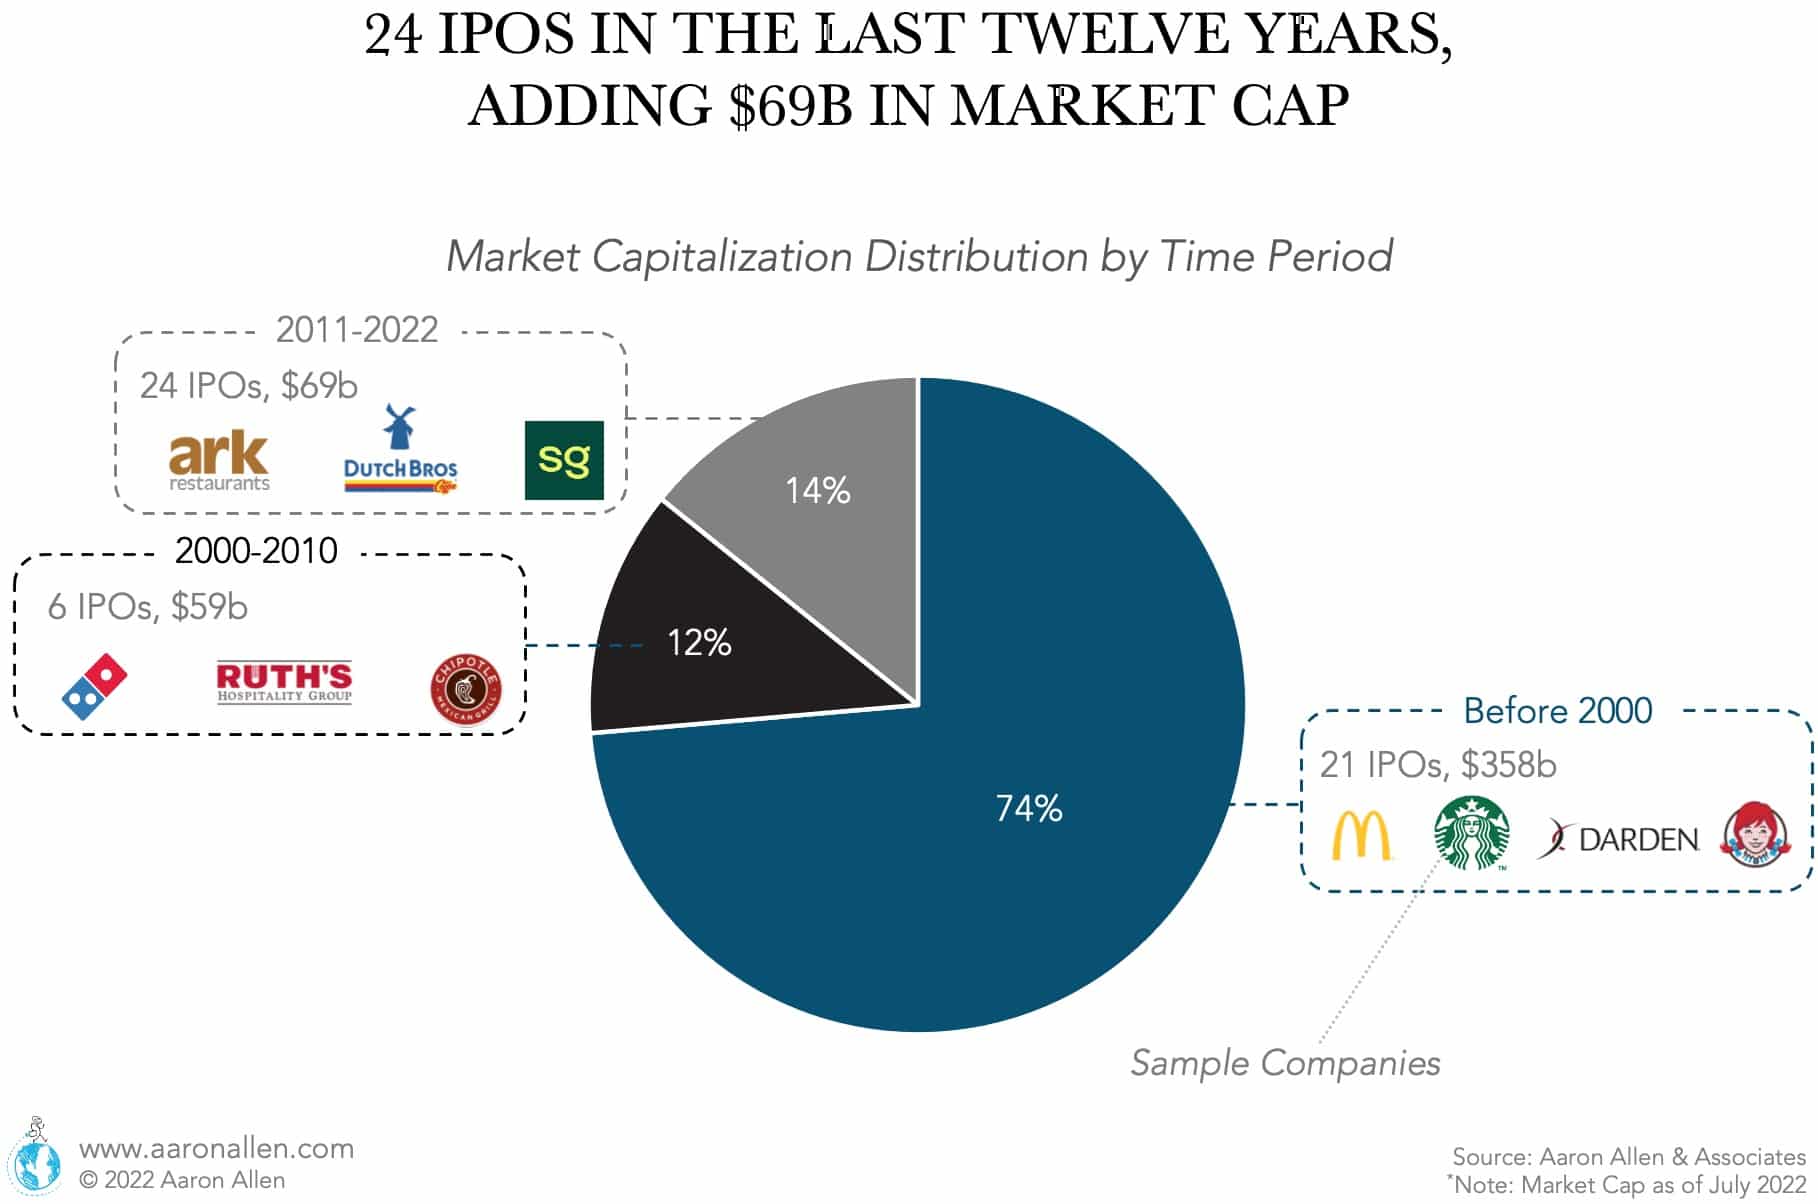 Share of market capitalization by decade (and before 2000)